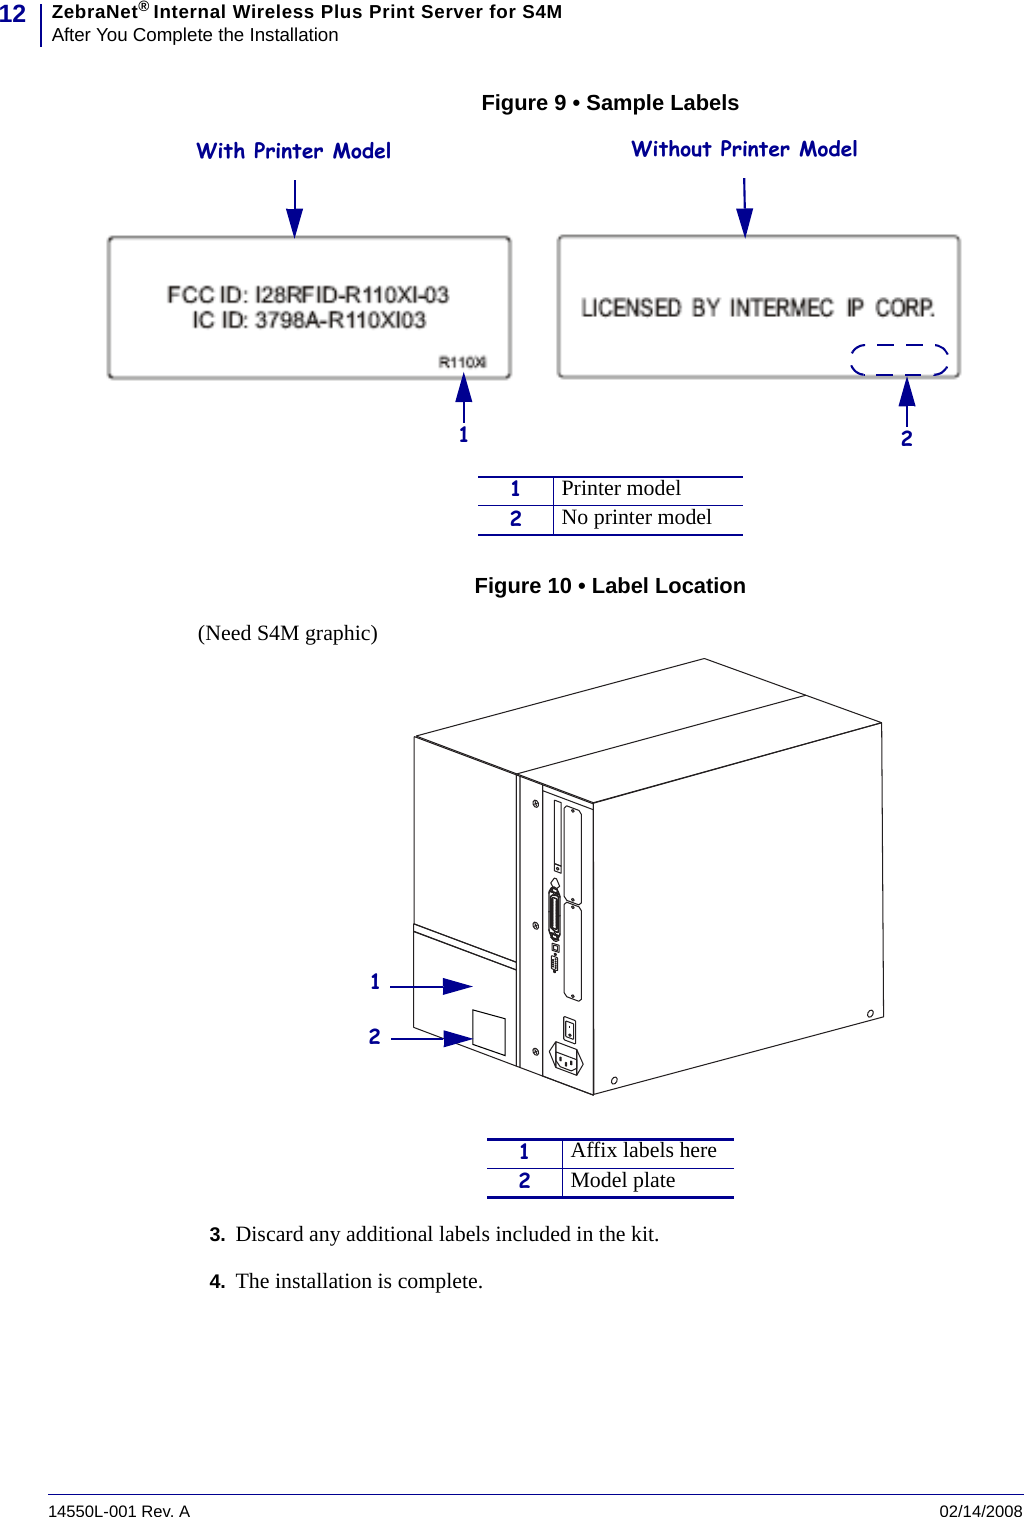 ZebraNet® Internal Wireless Plus Print Server for S4MAfter You Complete the Installation1214550L-001 Rev. A     02/14/2008Figure 9 • Sample LabelsFigure 10 • Label Location(Need S4M graphic)3. Discard any additional labels included in the kit.4. The installation is complete.With Printer Model21Without Printer Model1Printer model2No printer model1Affix labels here2Model plate12